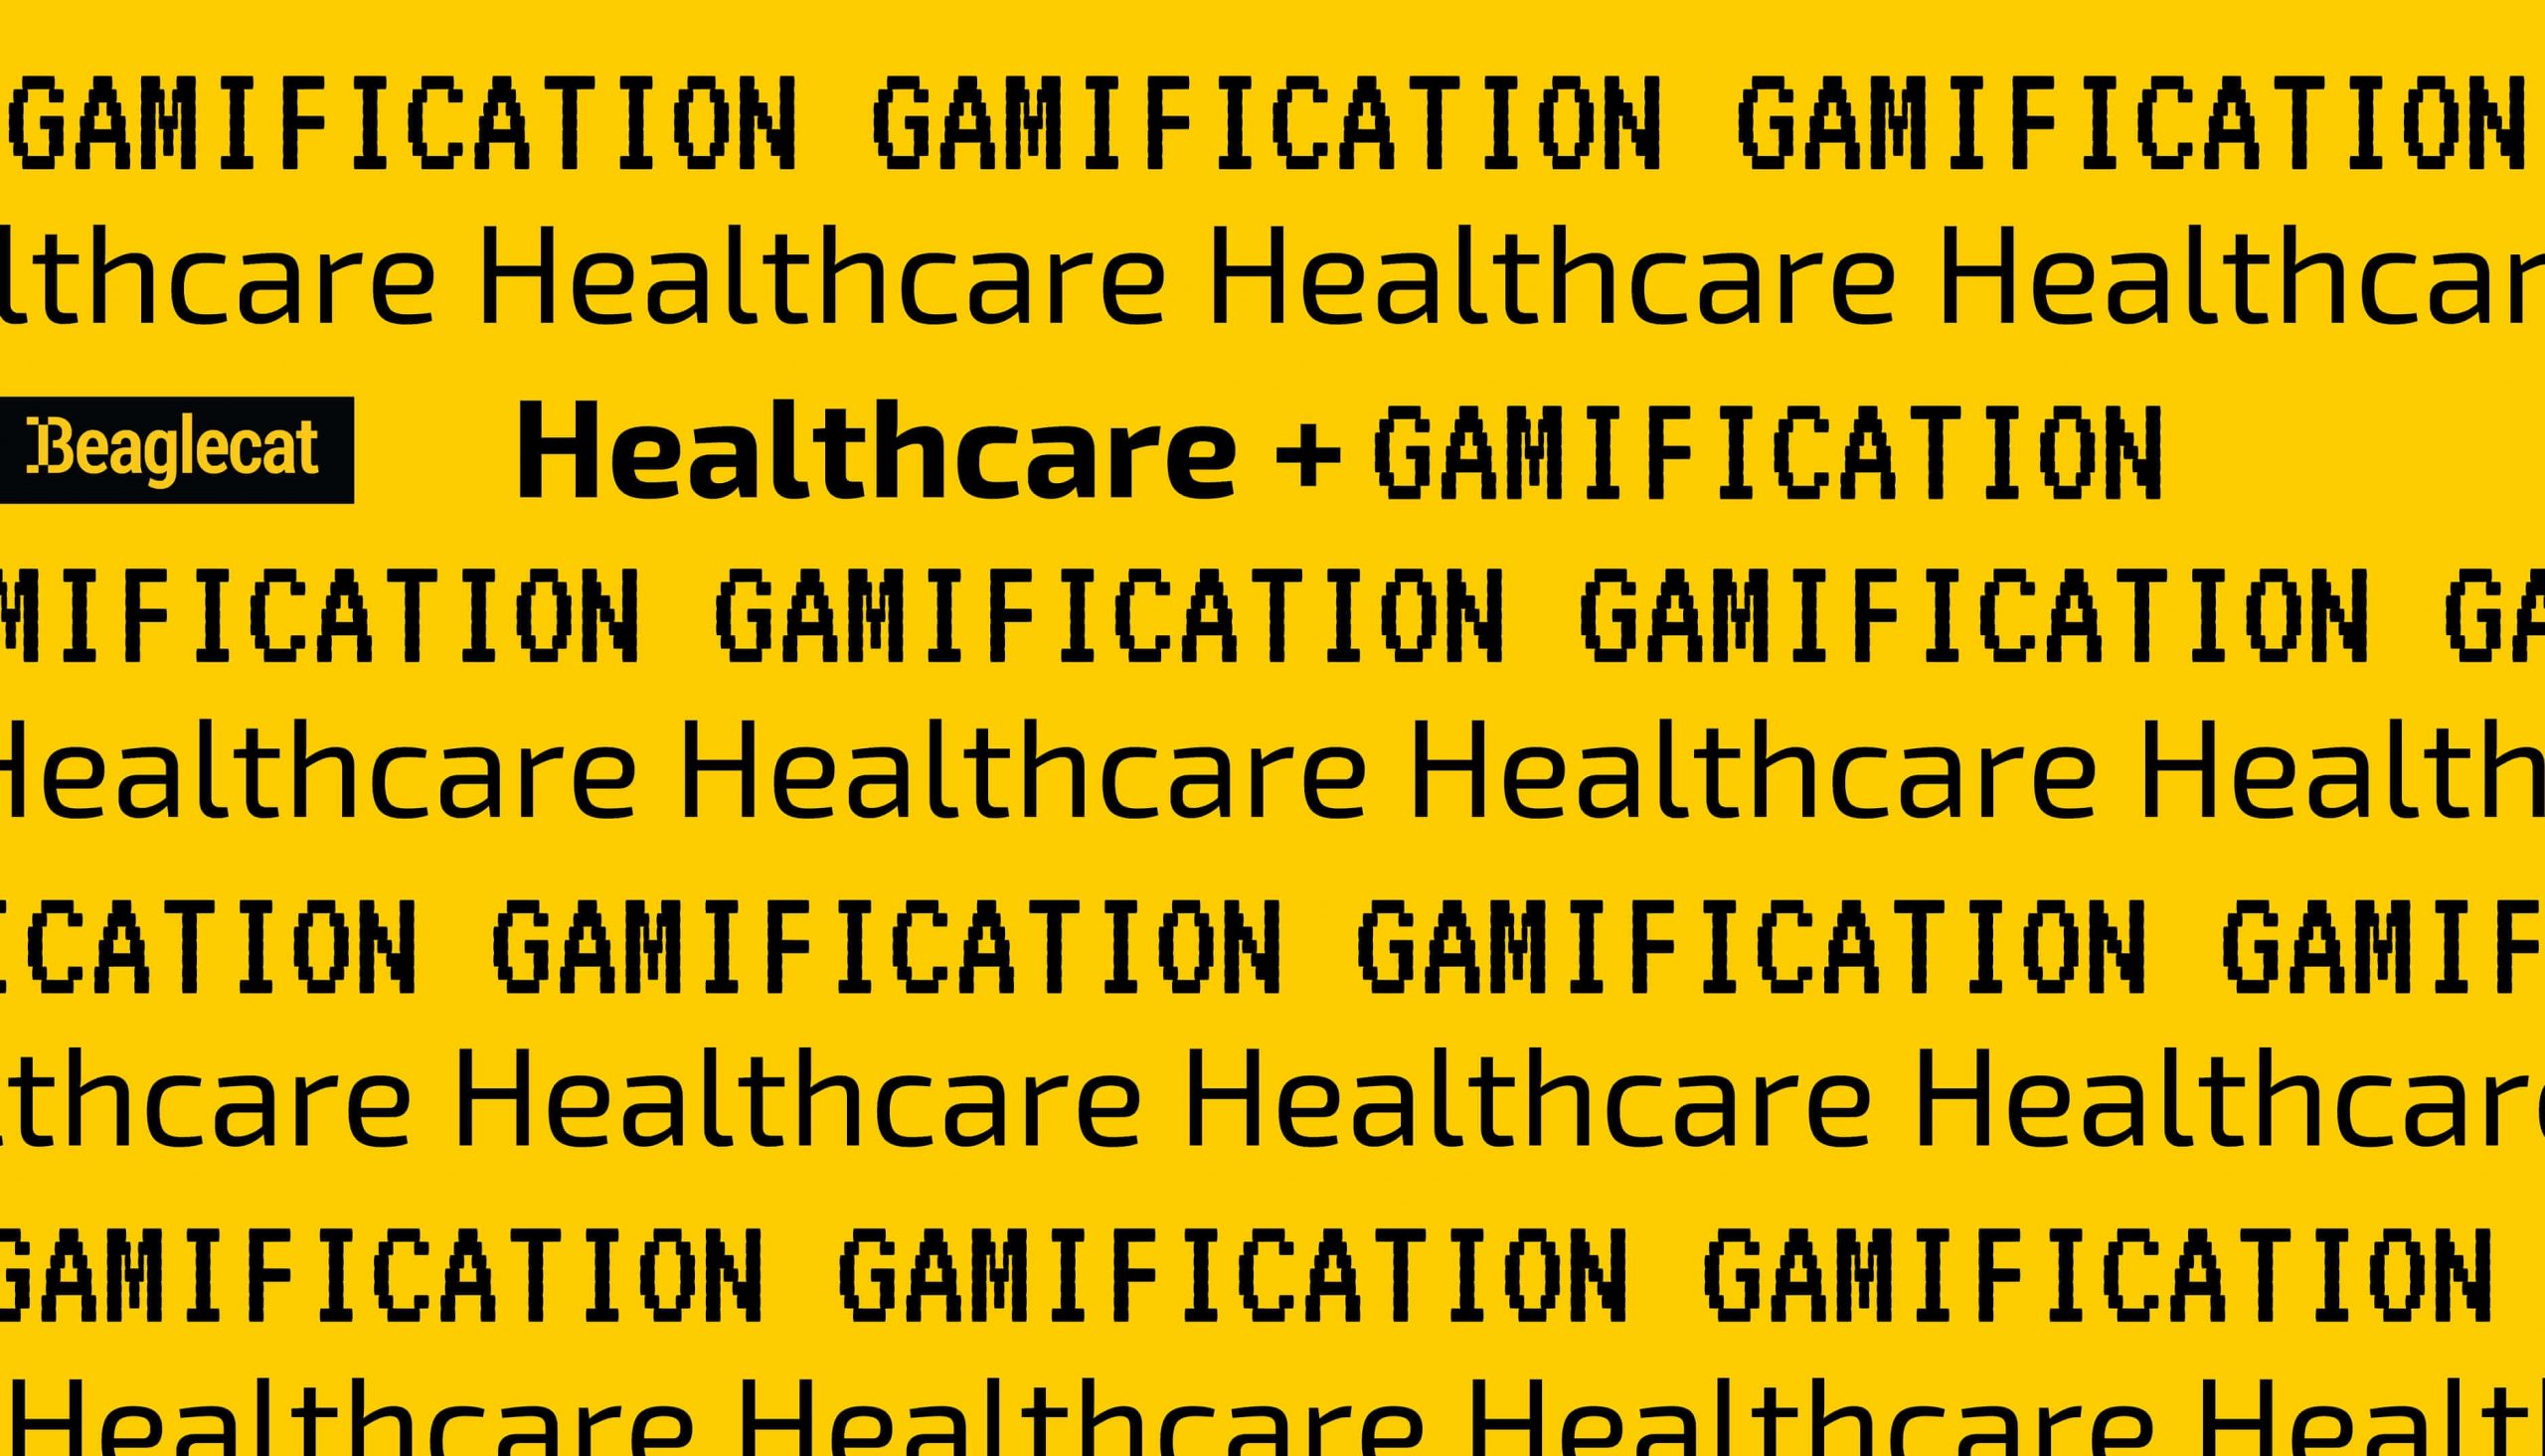 Engaging Gamification Examples in the Healthcare Sector